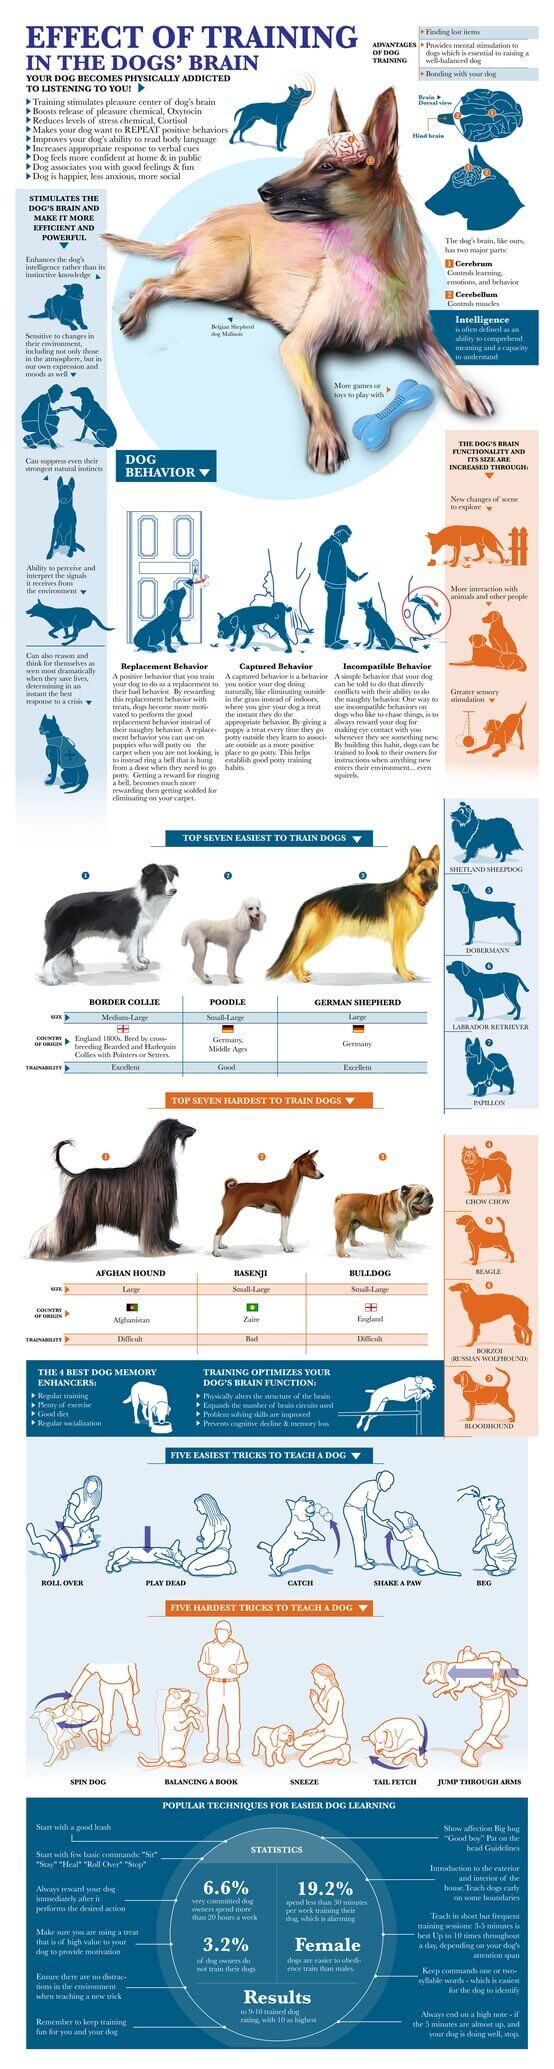 PRESS TO SEE FULL SIZED DOG BRAIN TRAINING INFOGRAPHICS